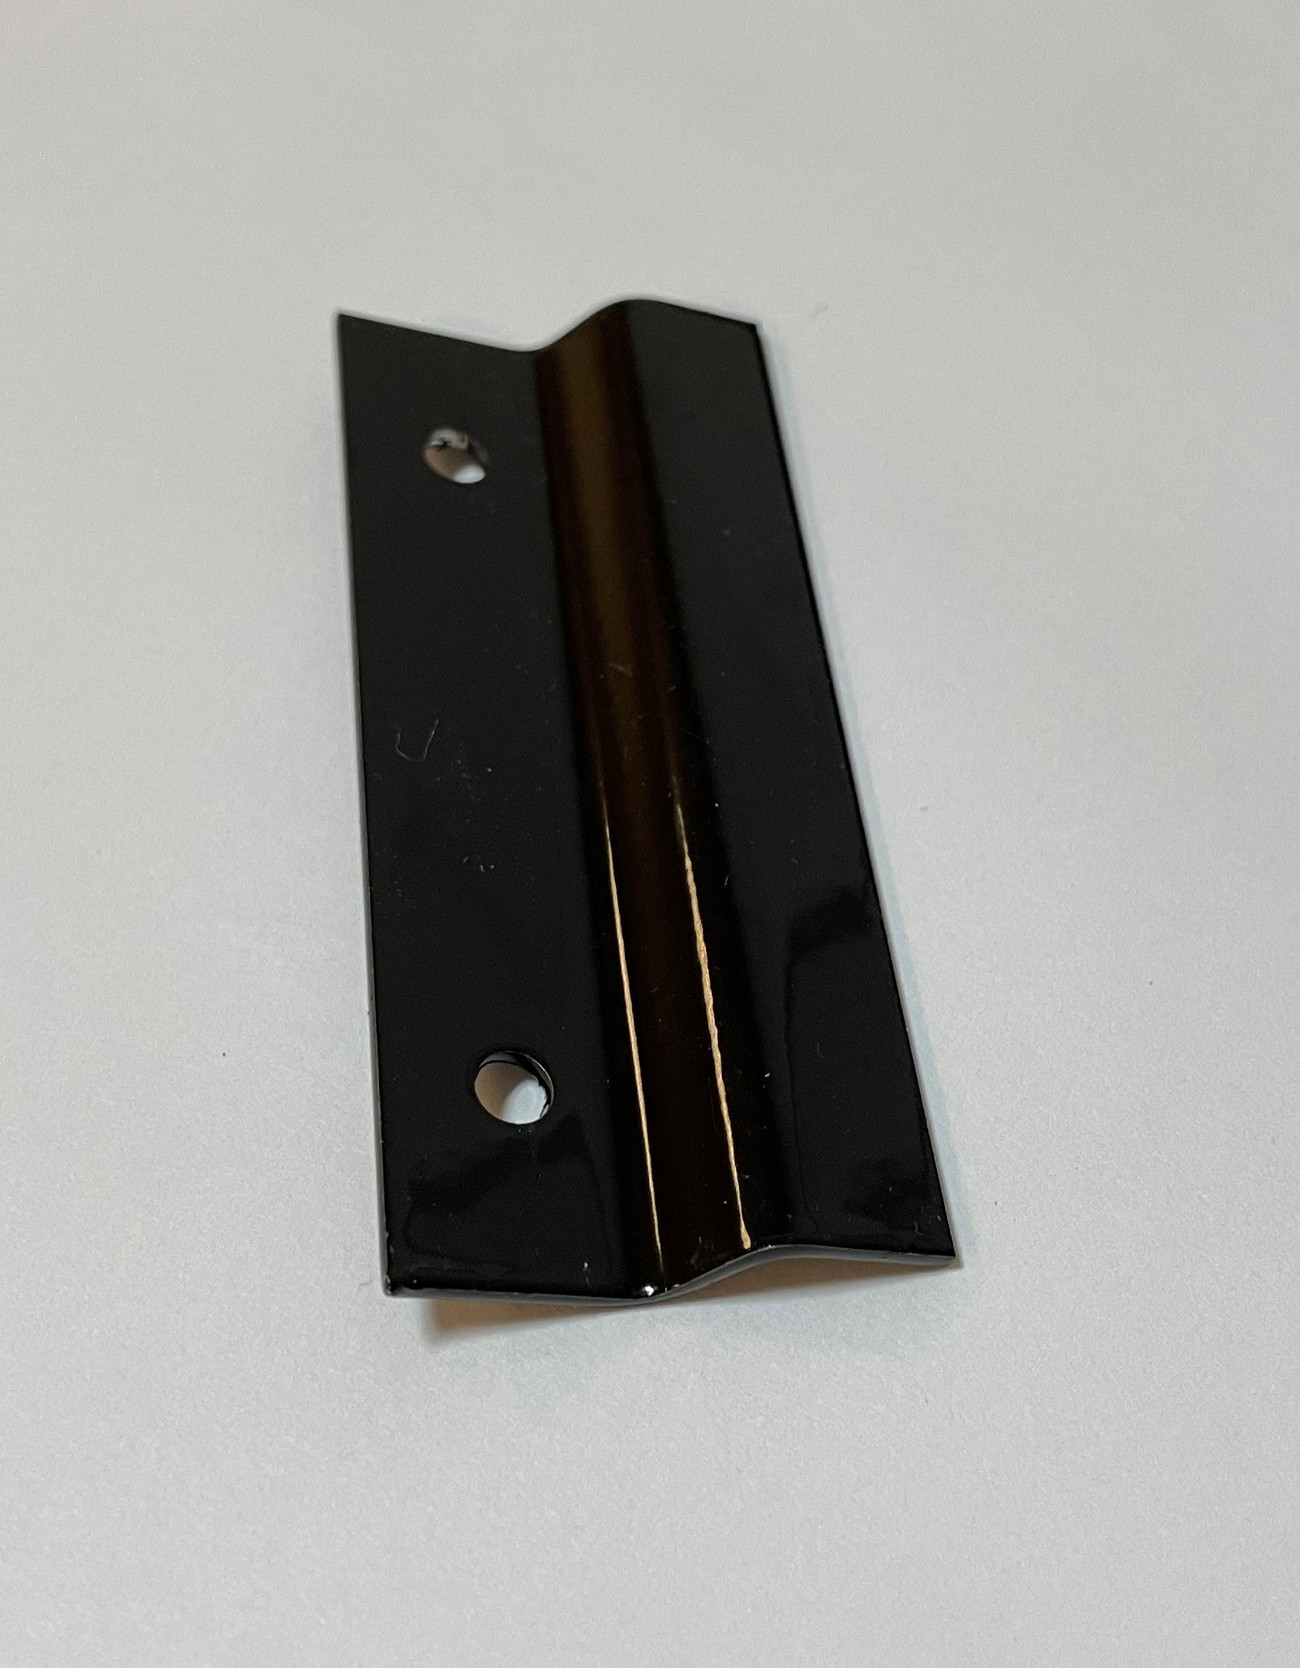 Black Bead Bracket. The exclusive bead and PVC bracket design allows our rails t o be hung outside or inside securely and they can be left in place without the fear of rusting or damage.